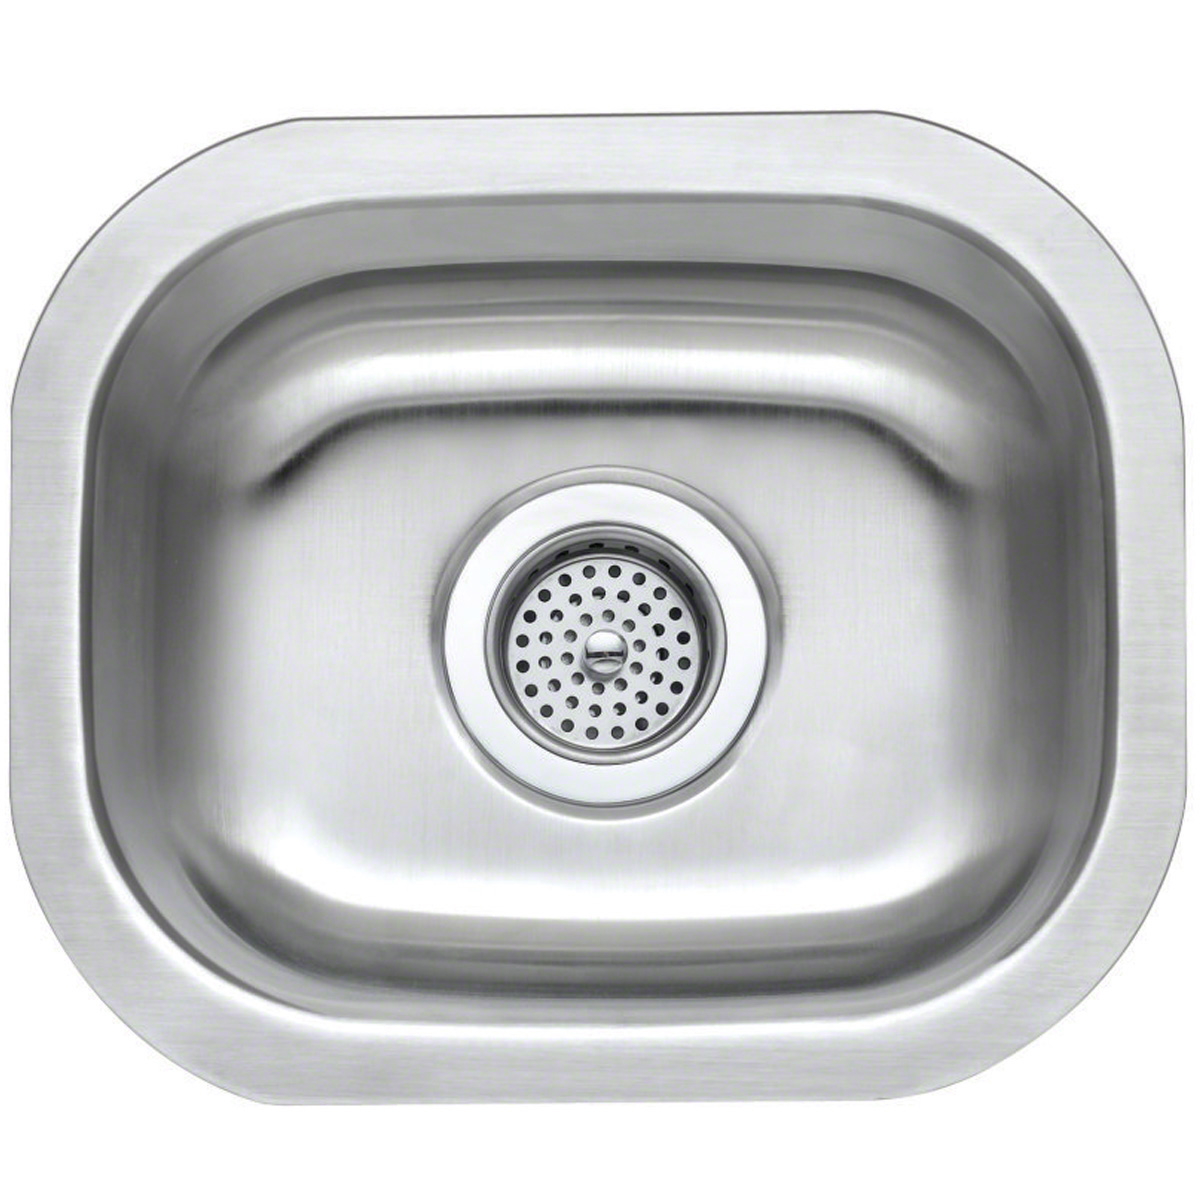 Stainless Steele Sink